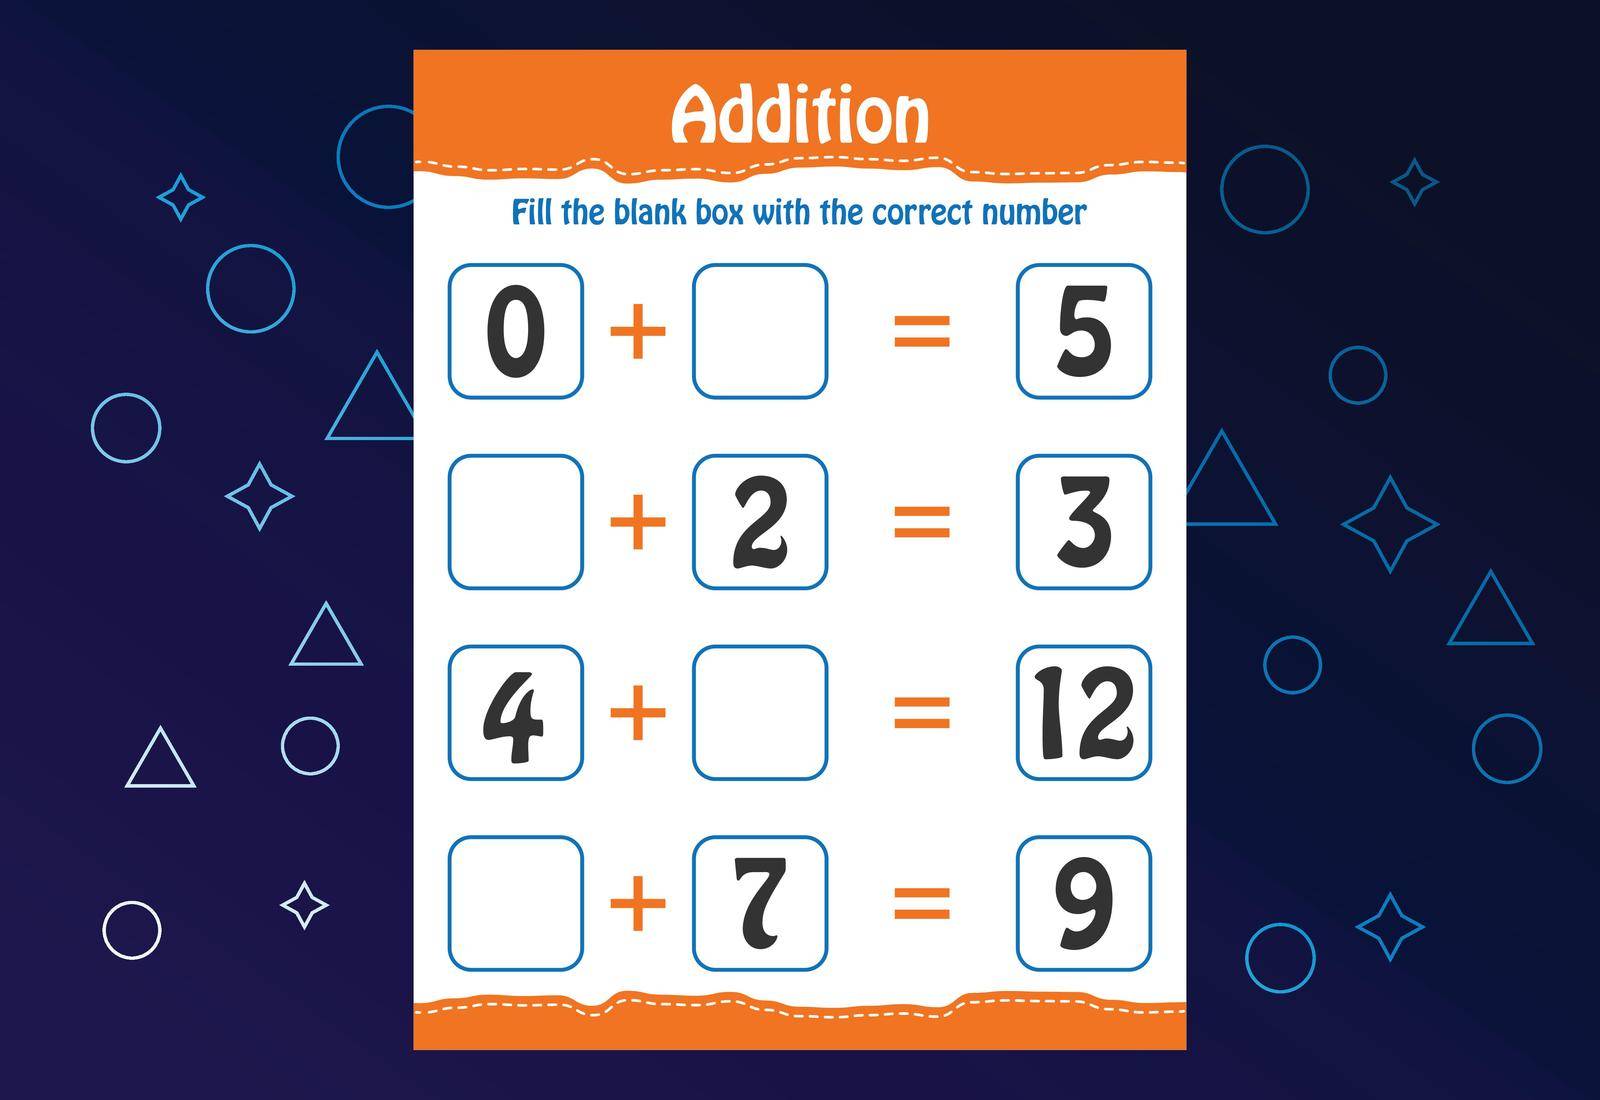 Basic math addition for kids. Fill the blank box with the correct number. Worksheet for kids by busrat